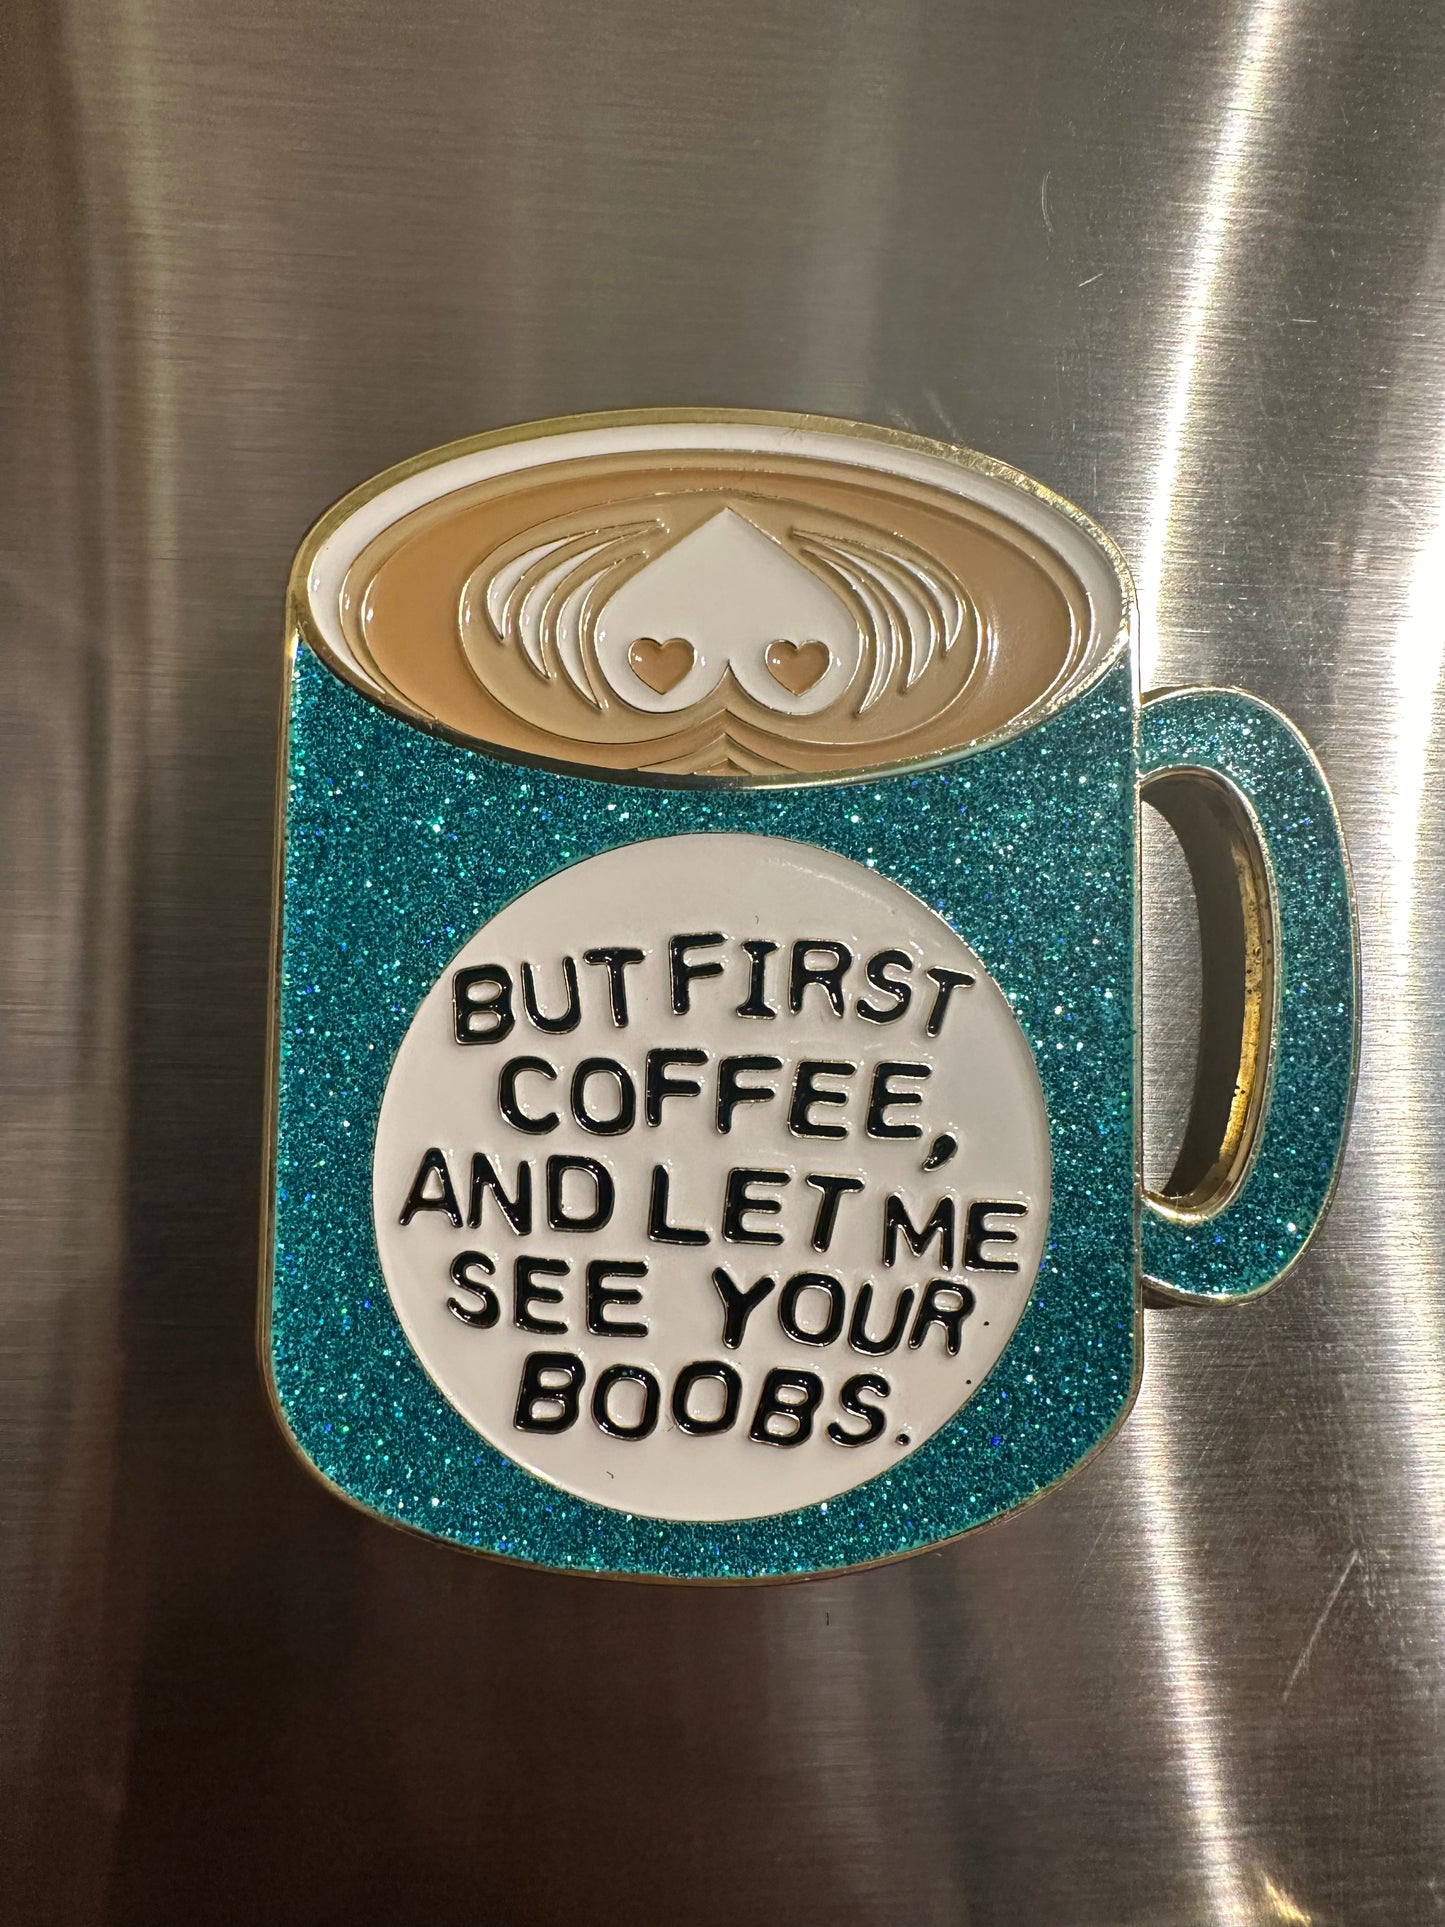 New! But first coffee, and let me see your boobs” metal fridge magnet 2.75”